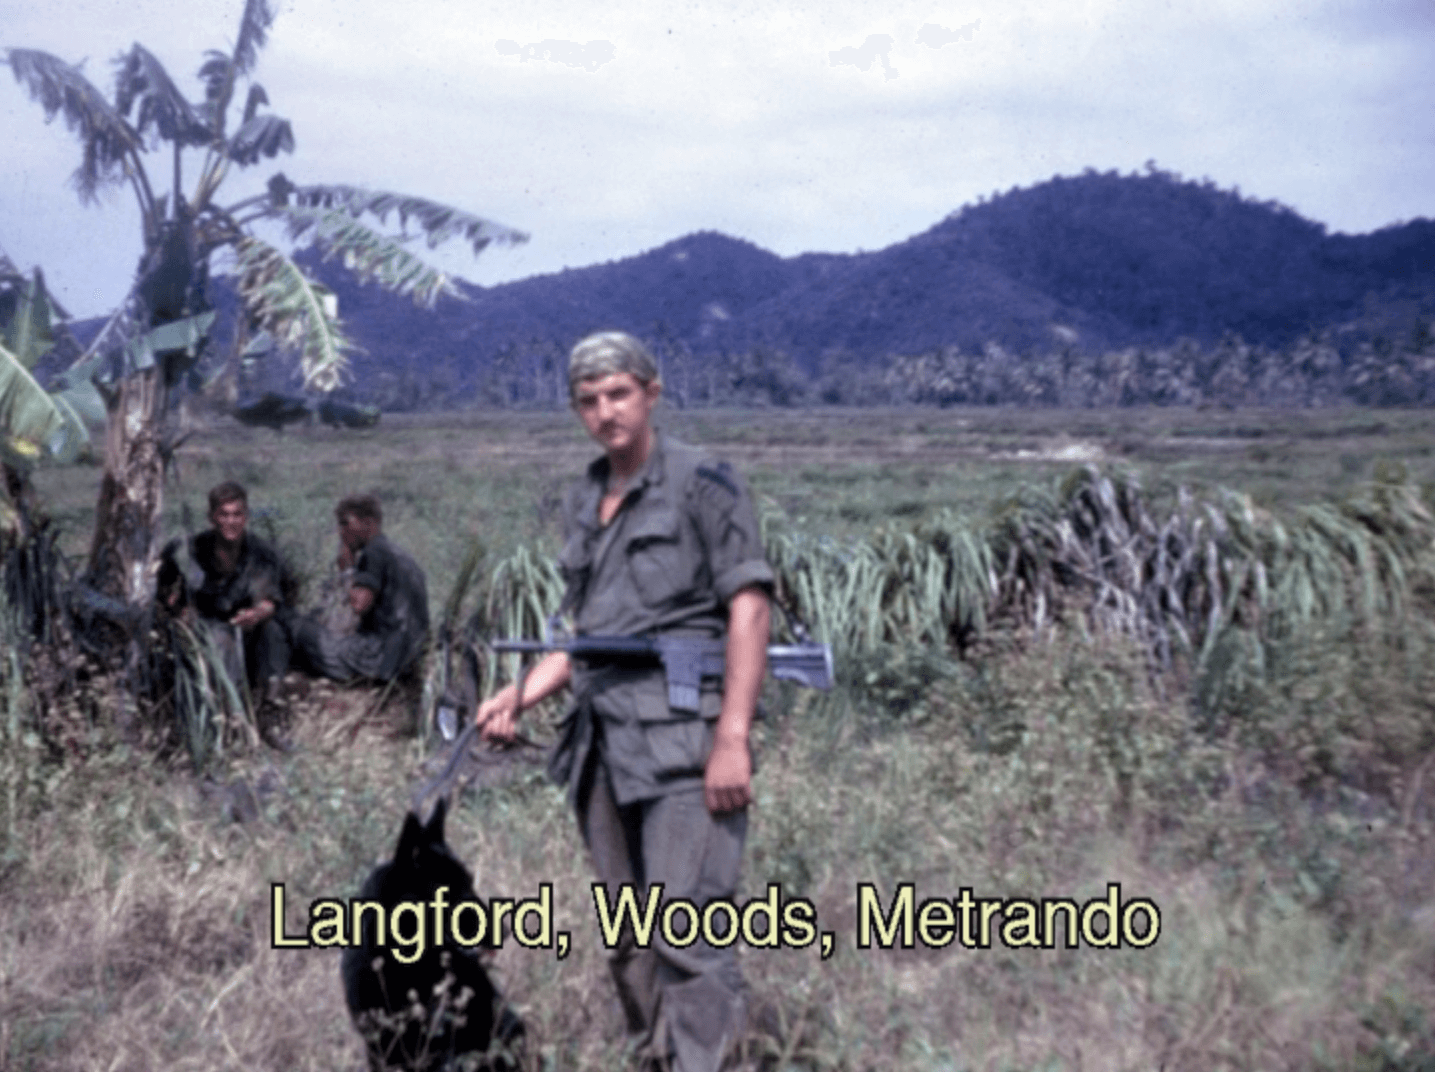 One soldier standing in the foreground, two soldiers crouching in the shade in the background. Grasses and mountains populate the landscape. Text on photo says "Langford, Woods, Metrando."